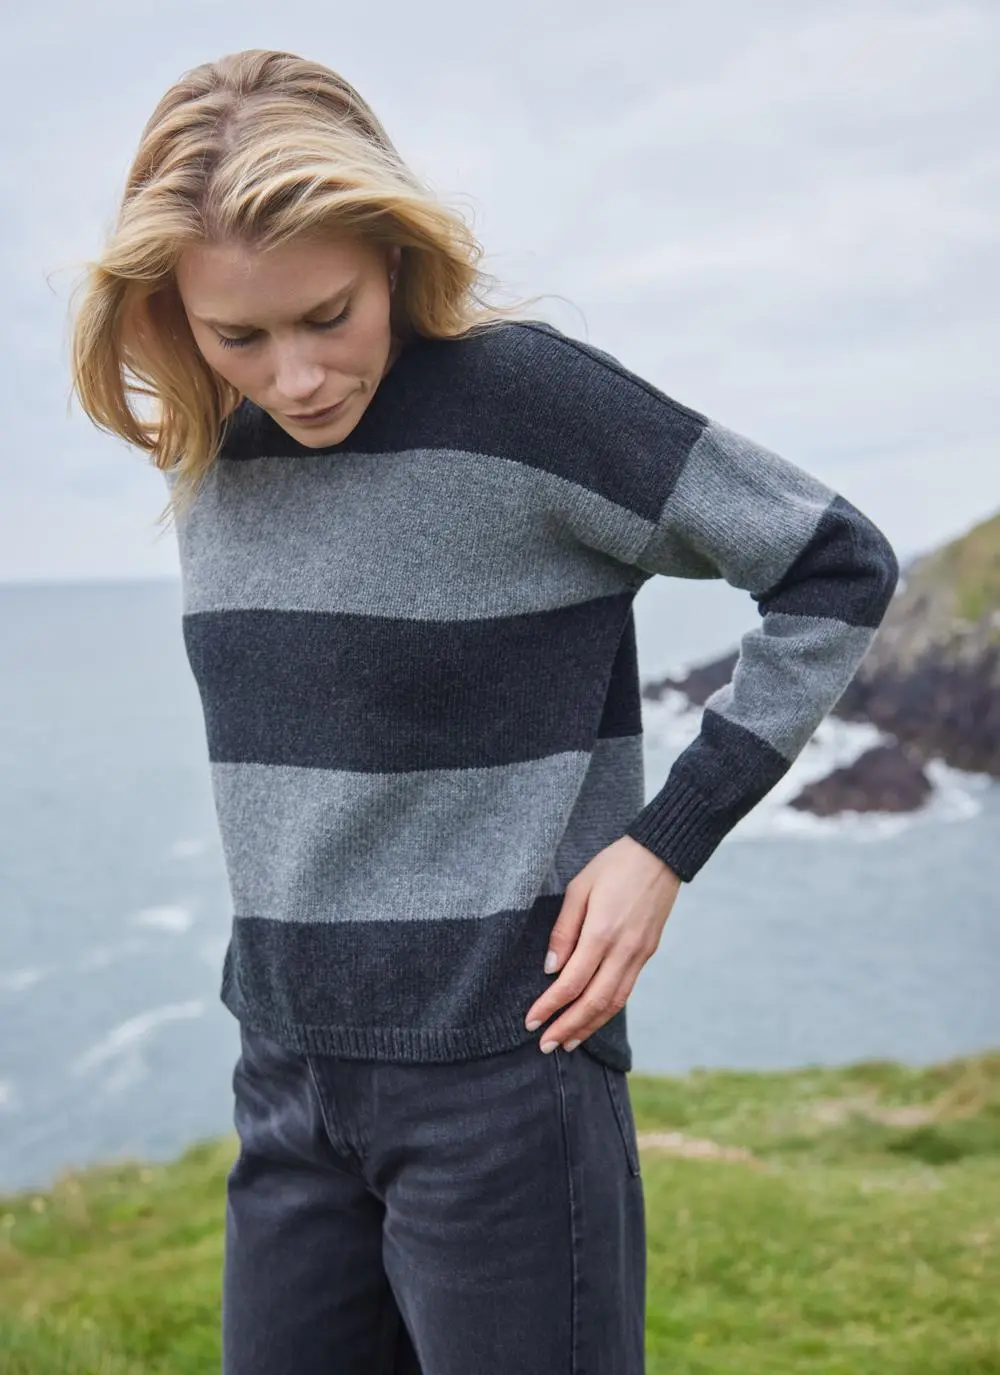 blonde woman looking down standing by Irish cliffs on a windy day wearing a grey stripe sweater with hands on hips